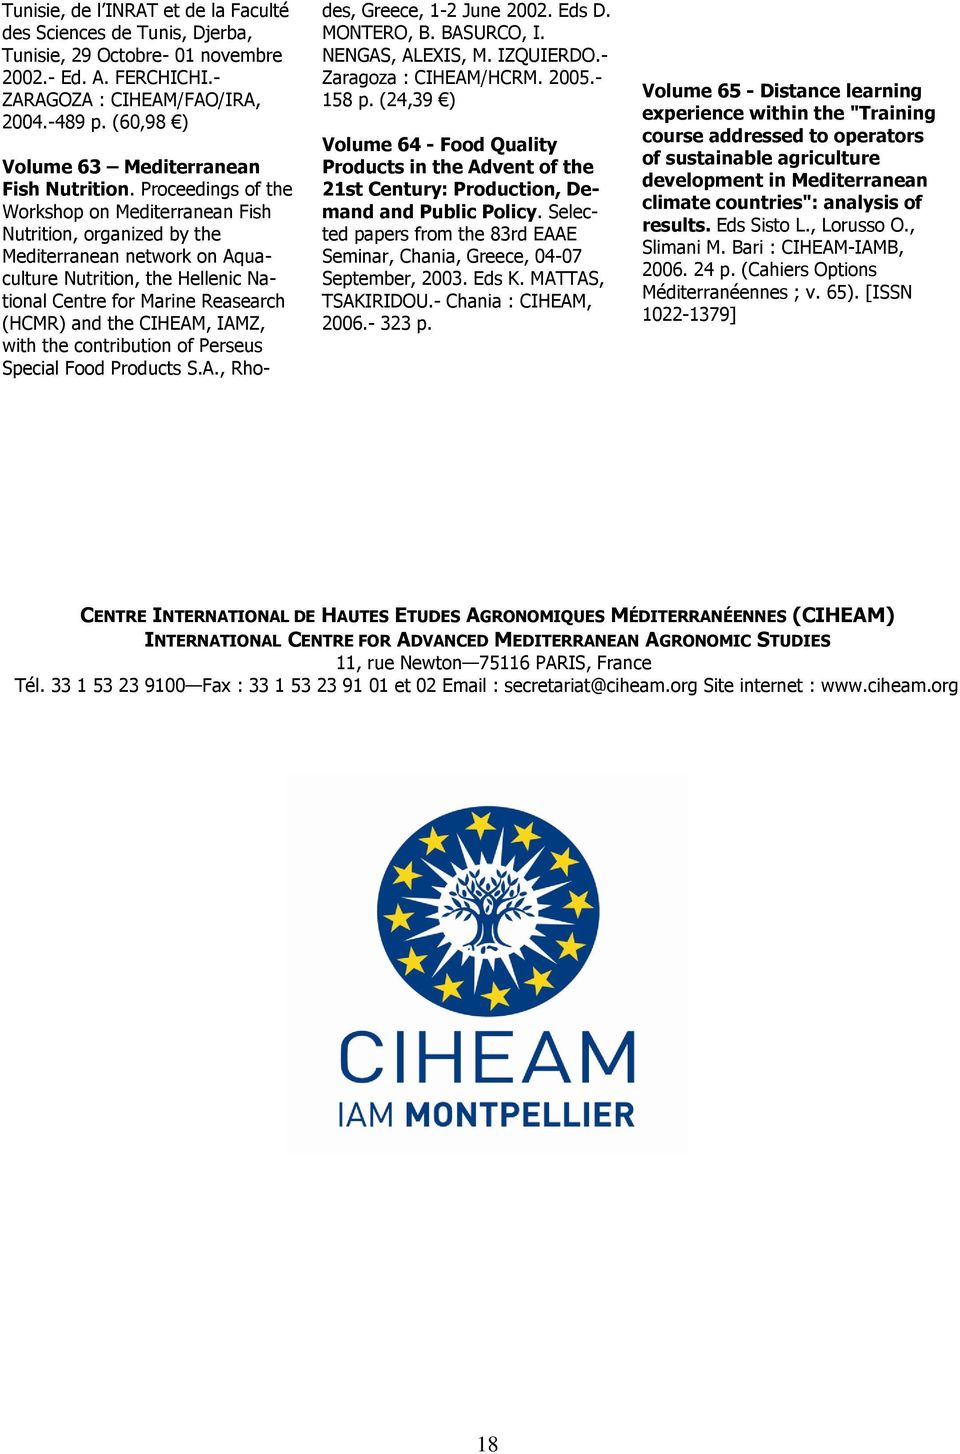 Proceedings of the Workshop on Mediterranean Fish Nutrition, organized by the Mediterranean network on Aquaculture Nutrition, the Hellenic National Centre for Marine Reasearch (HCMR) and the CIHEAM,